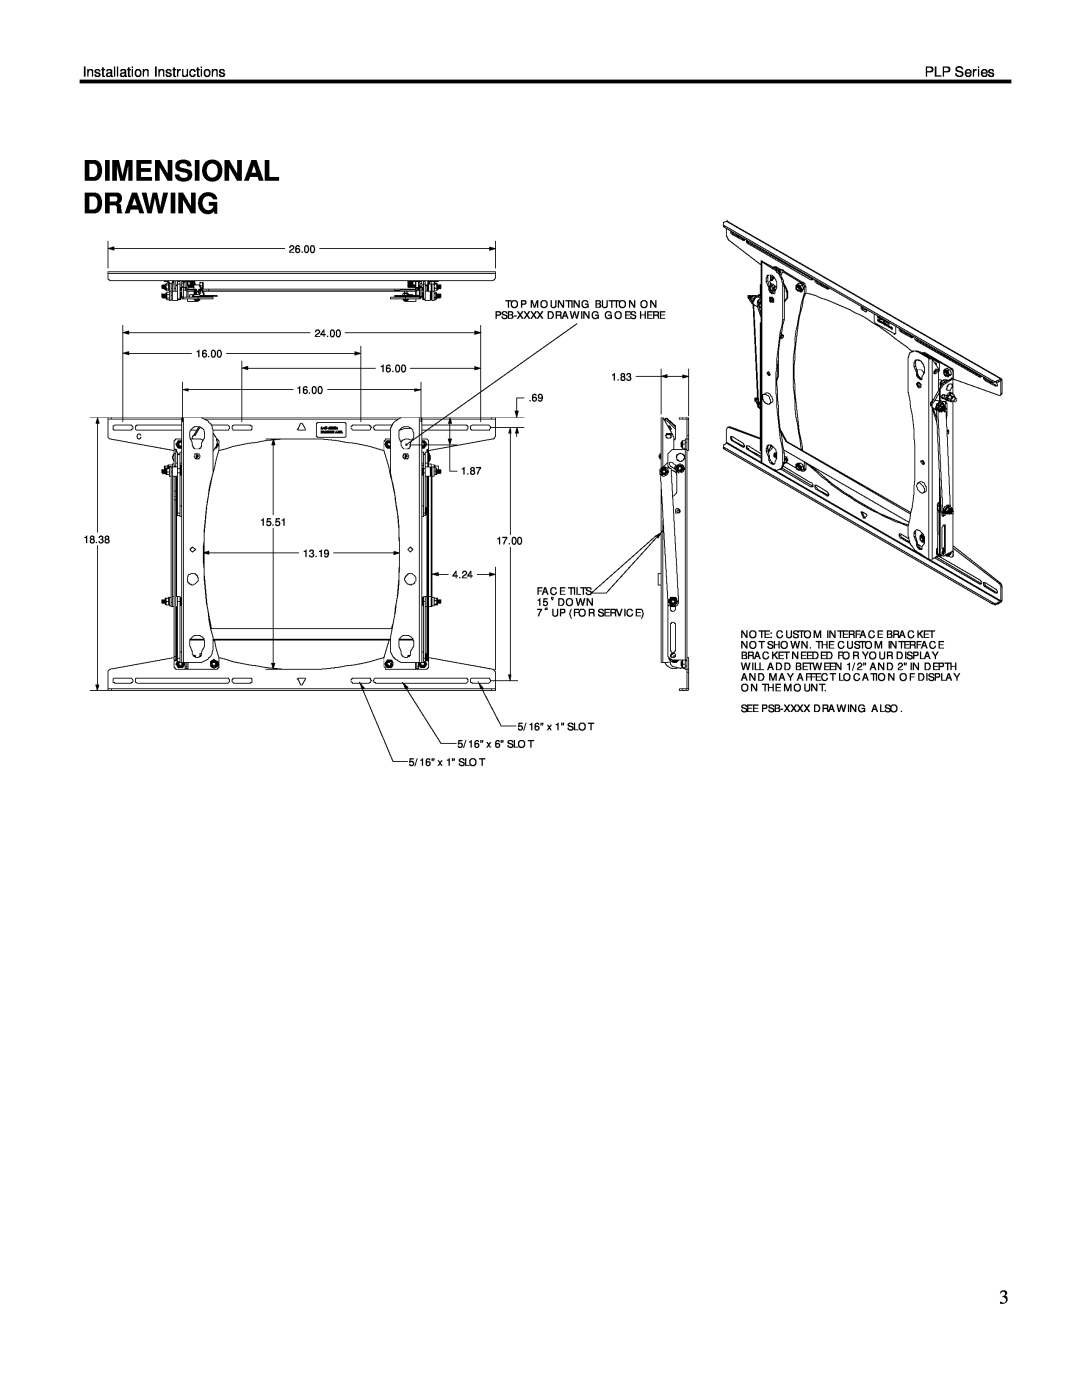 Chief Manufacturing PLP Series installation instructions Dimensional Drawing, Installation Instructions 